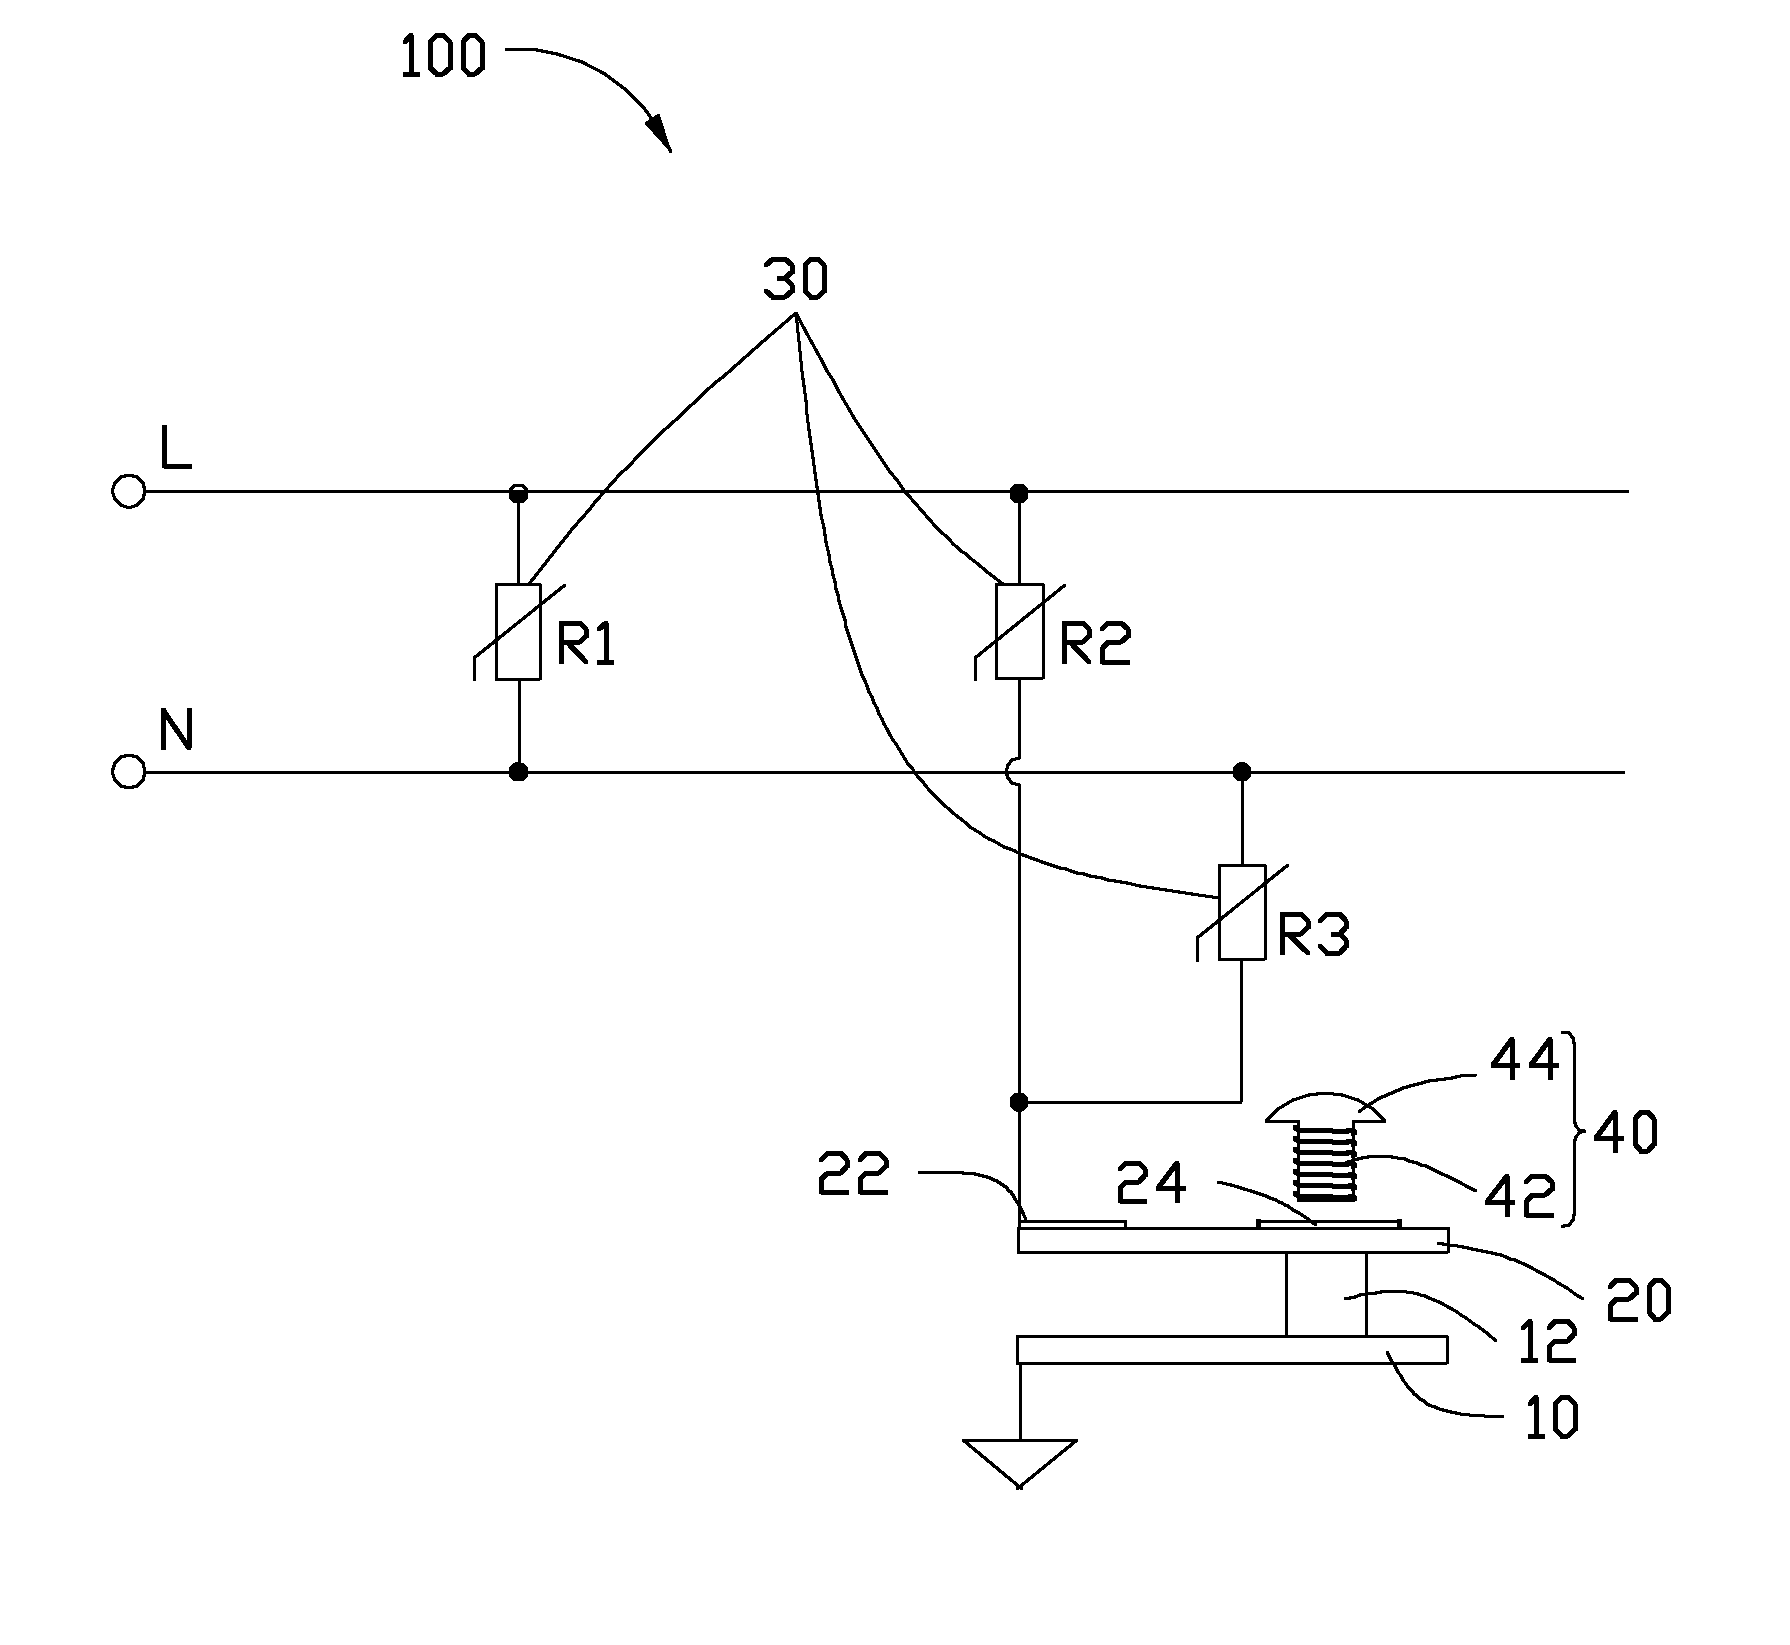 Over-voltage protection device